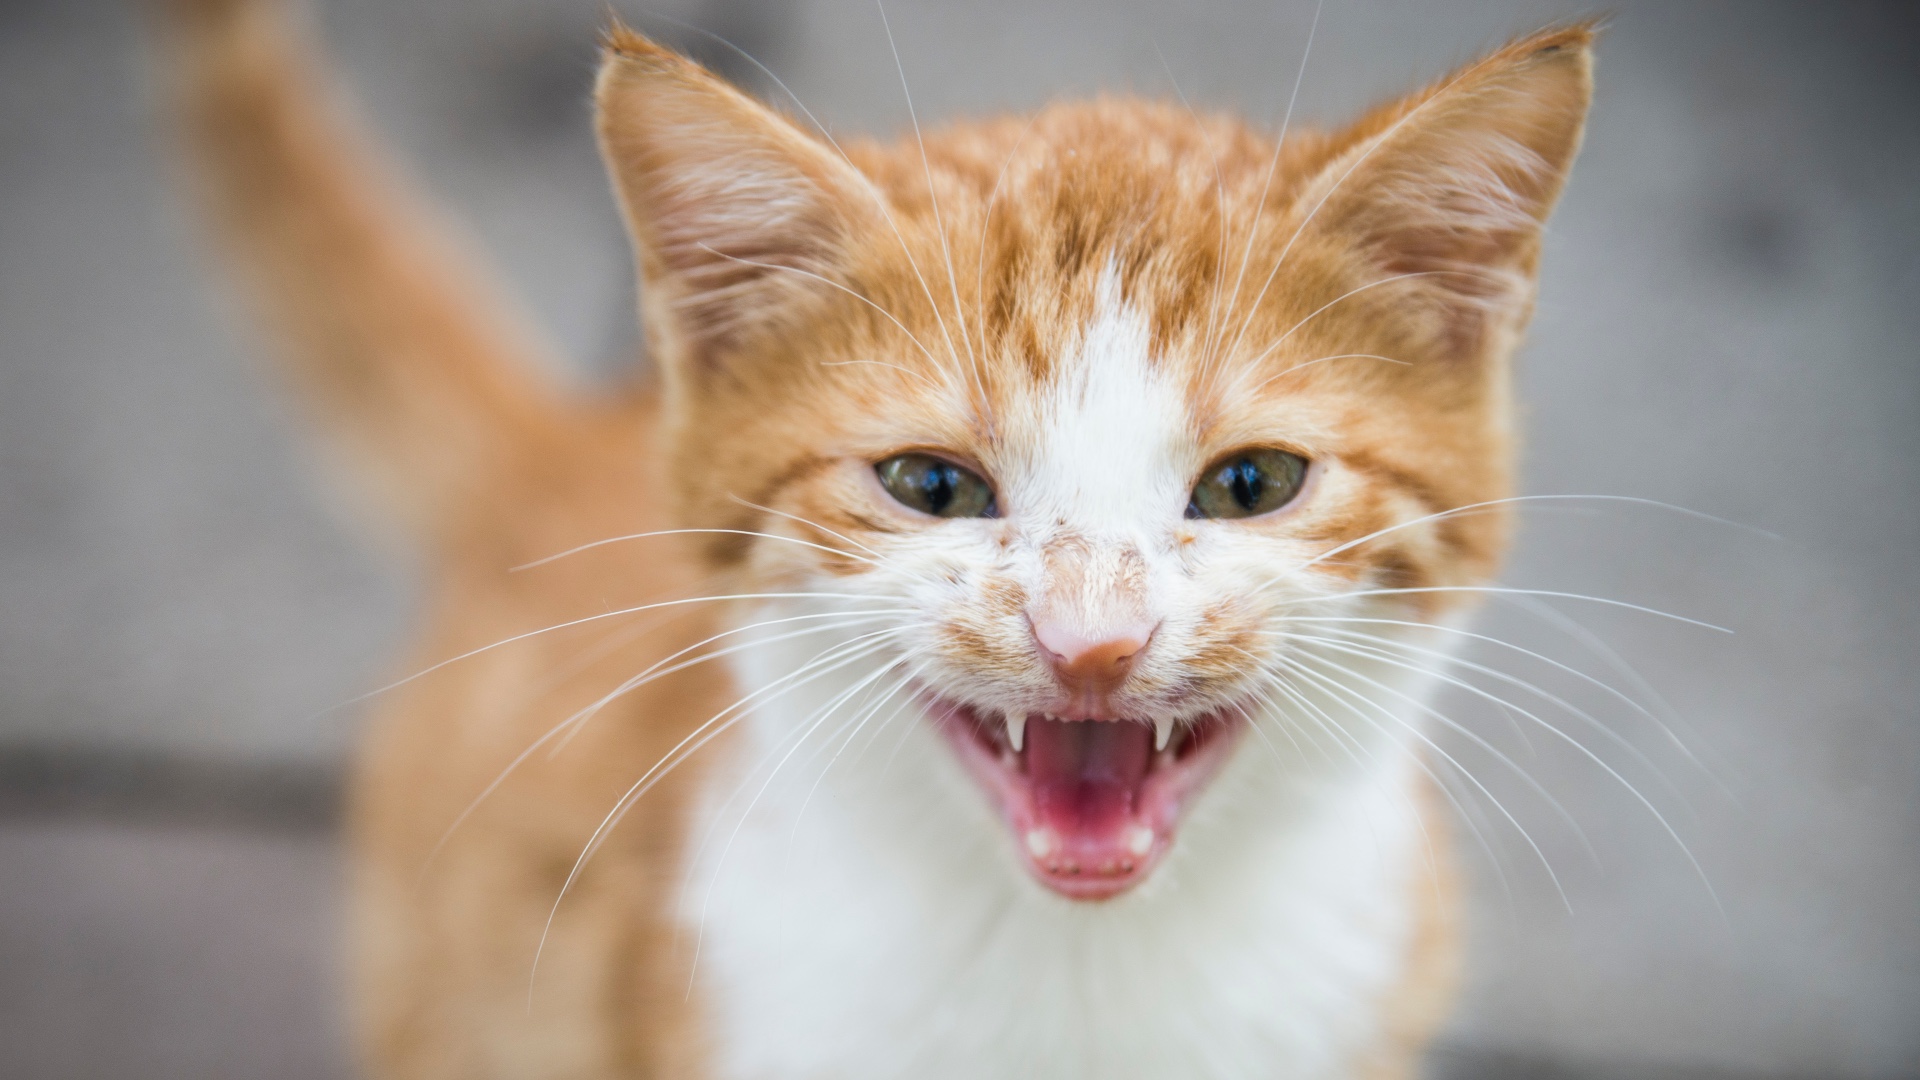 Why is my cat meowing so much? | PetsRadar